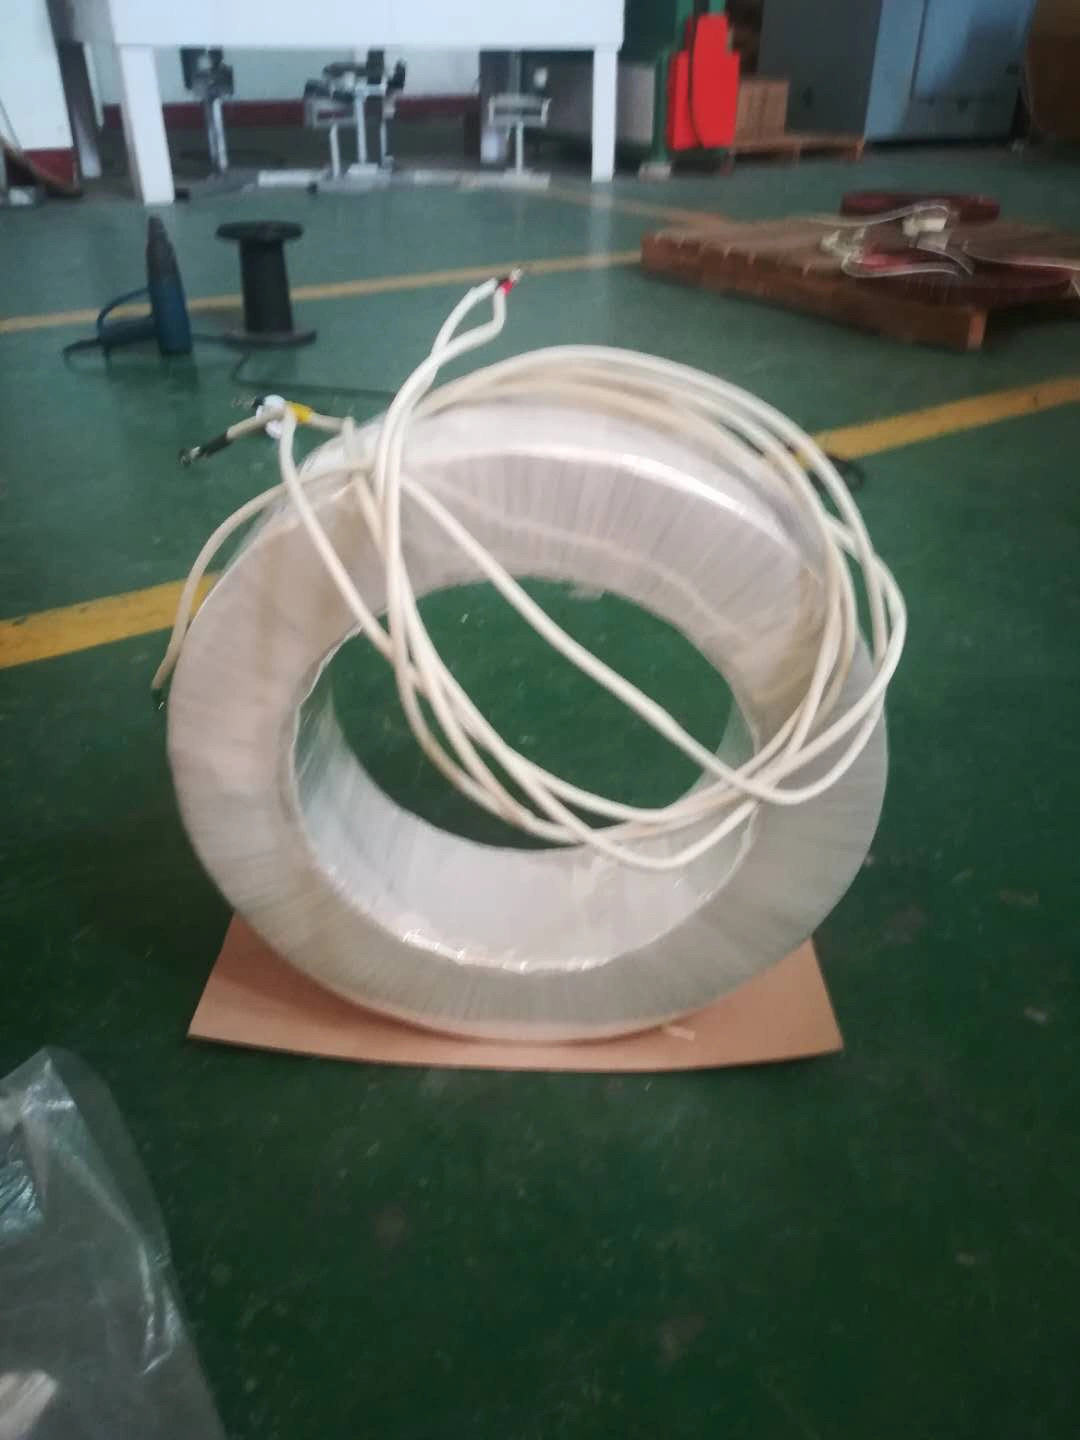 33kv to 550kv External or Built in Type Epoxy Resin Bushing Current Transformer for Power Transformer and Circuit Breaker with Stainless Cover